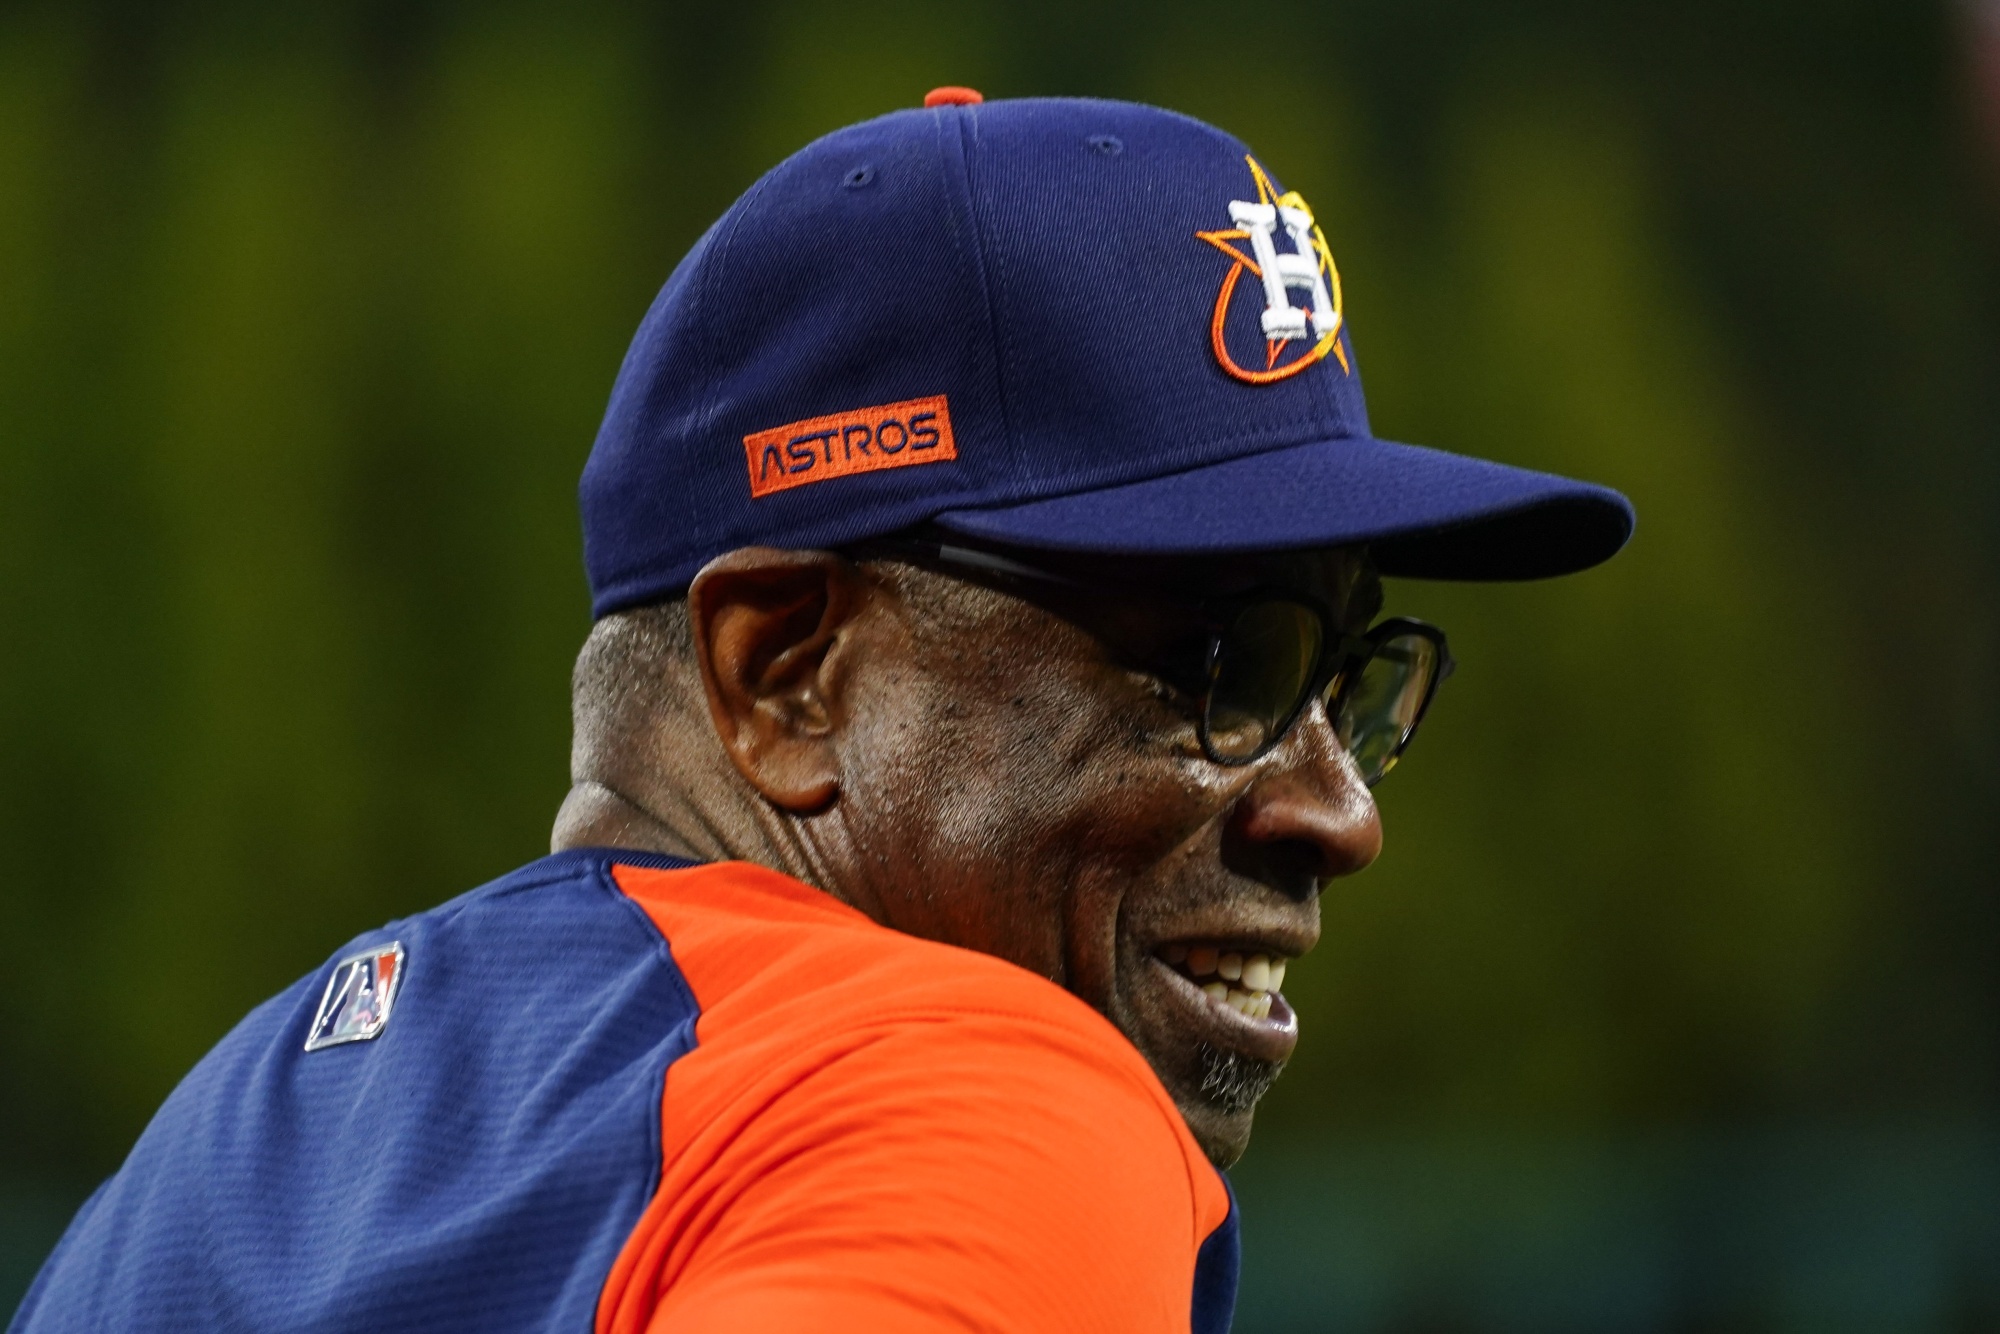 Houston Astros Manager Dusty Baker says it 'looks bad' that the